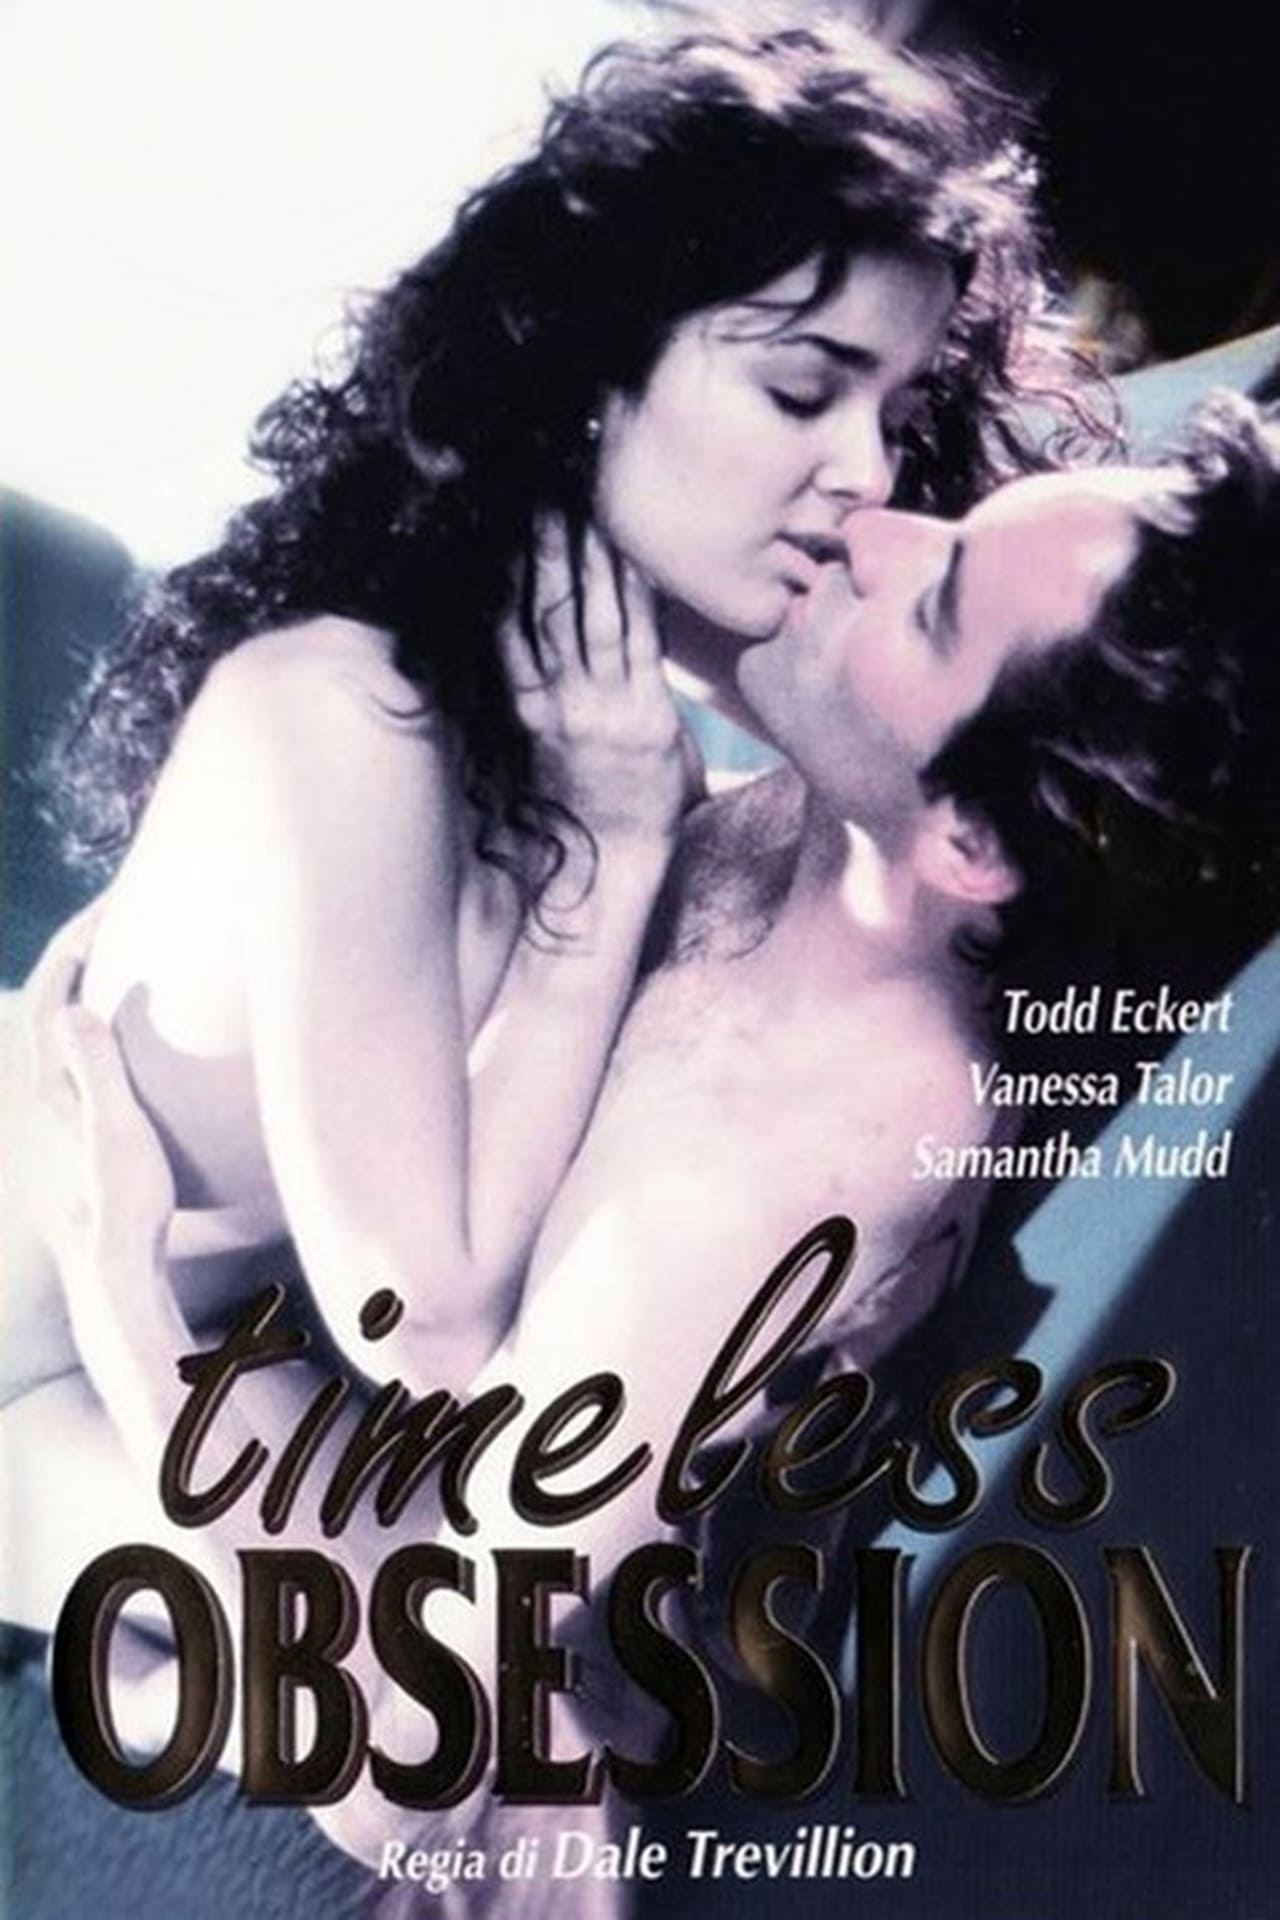 18+Timeless Obsession 1996 English 300MB HDRip 480p Download